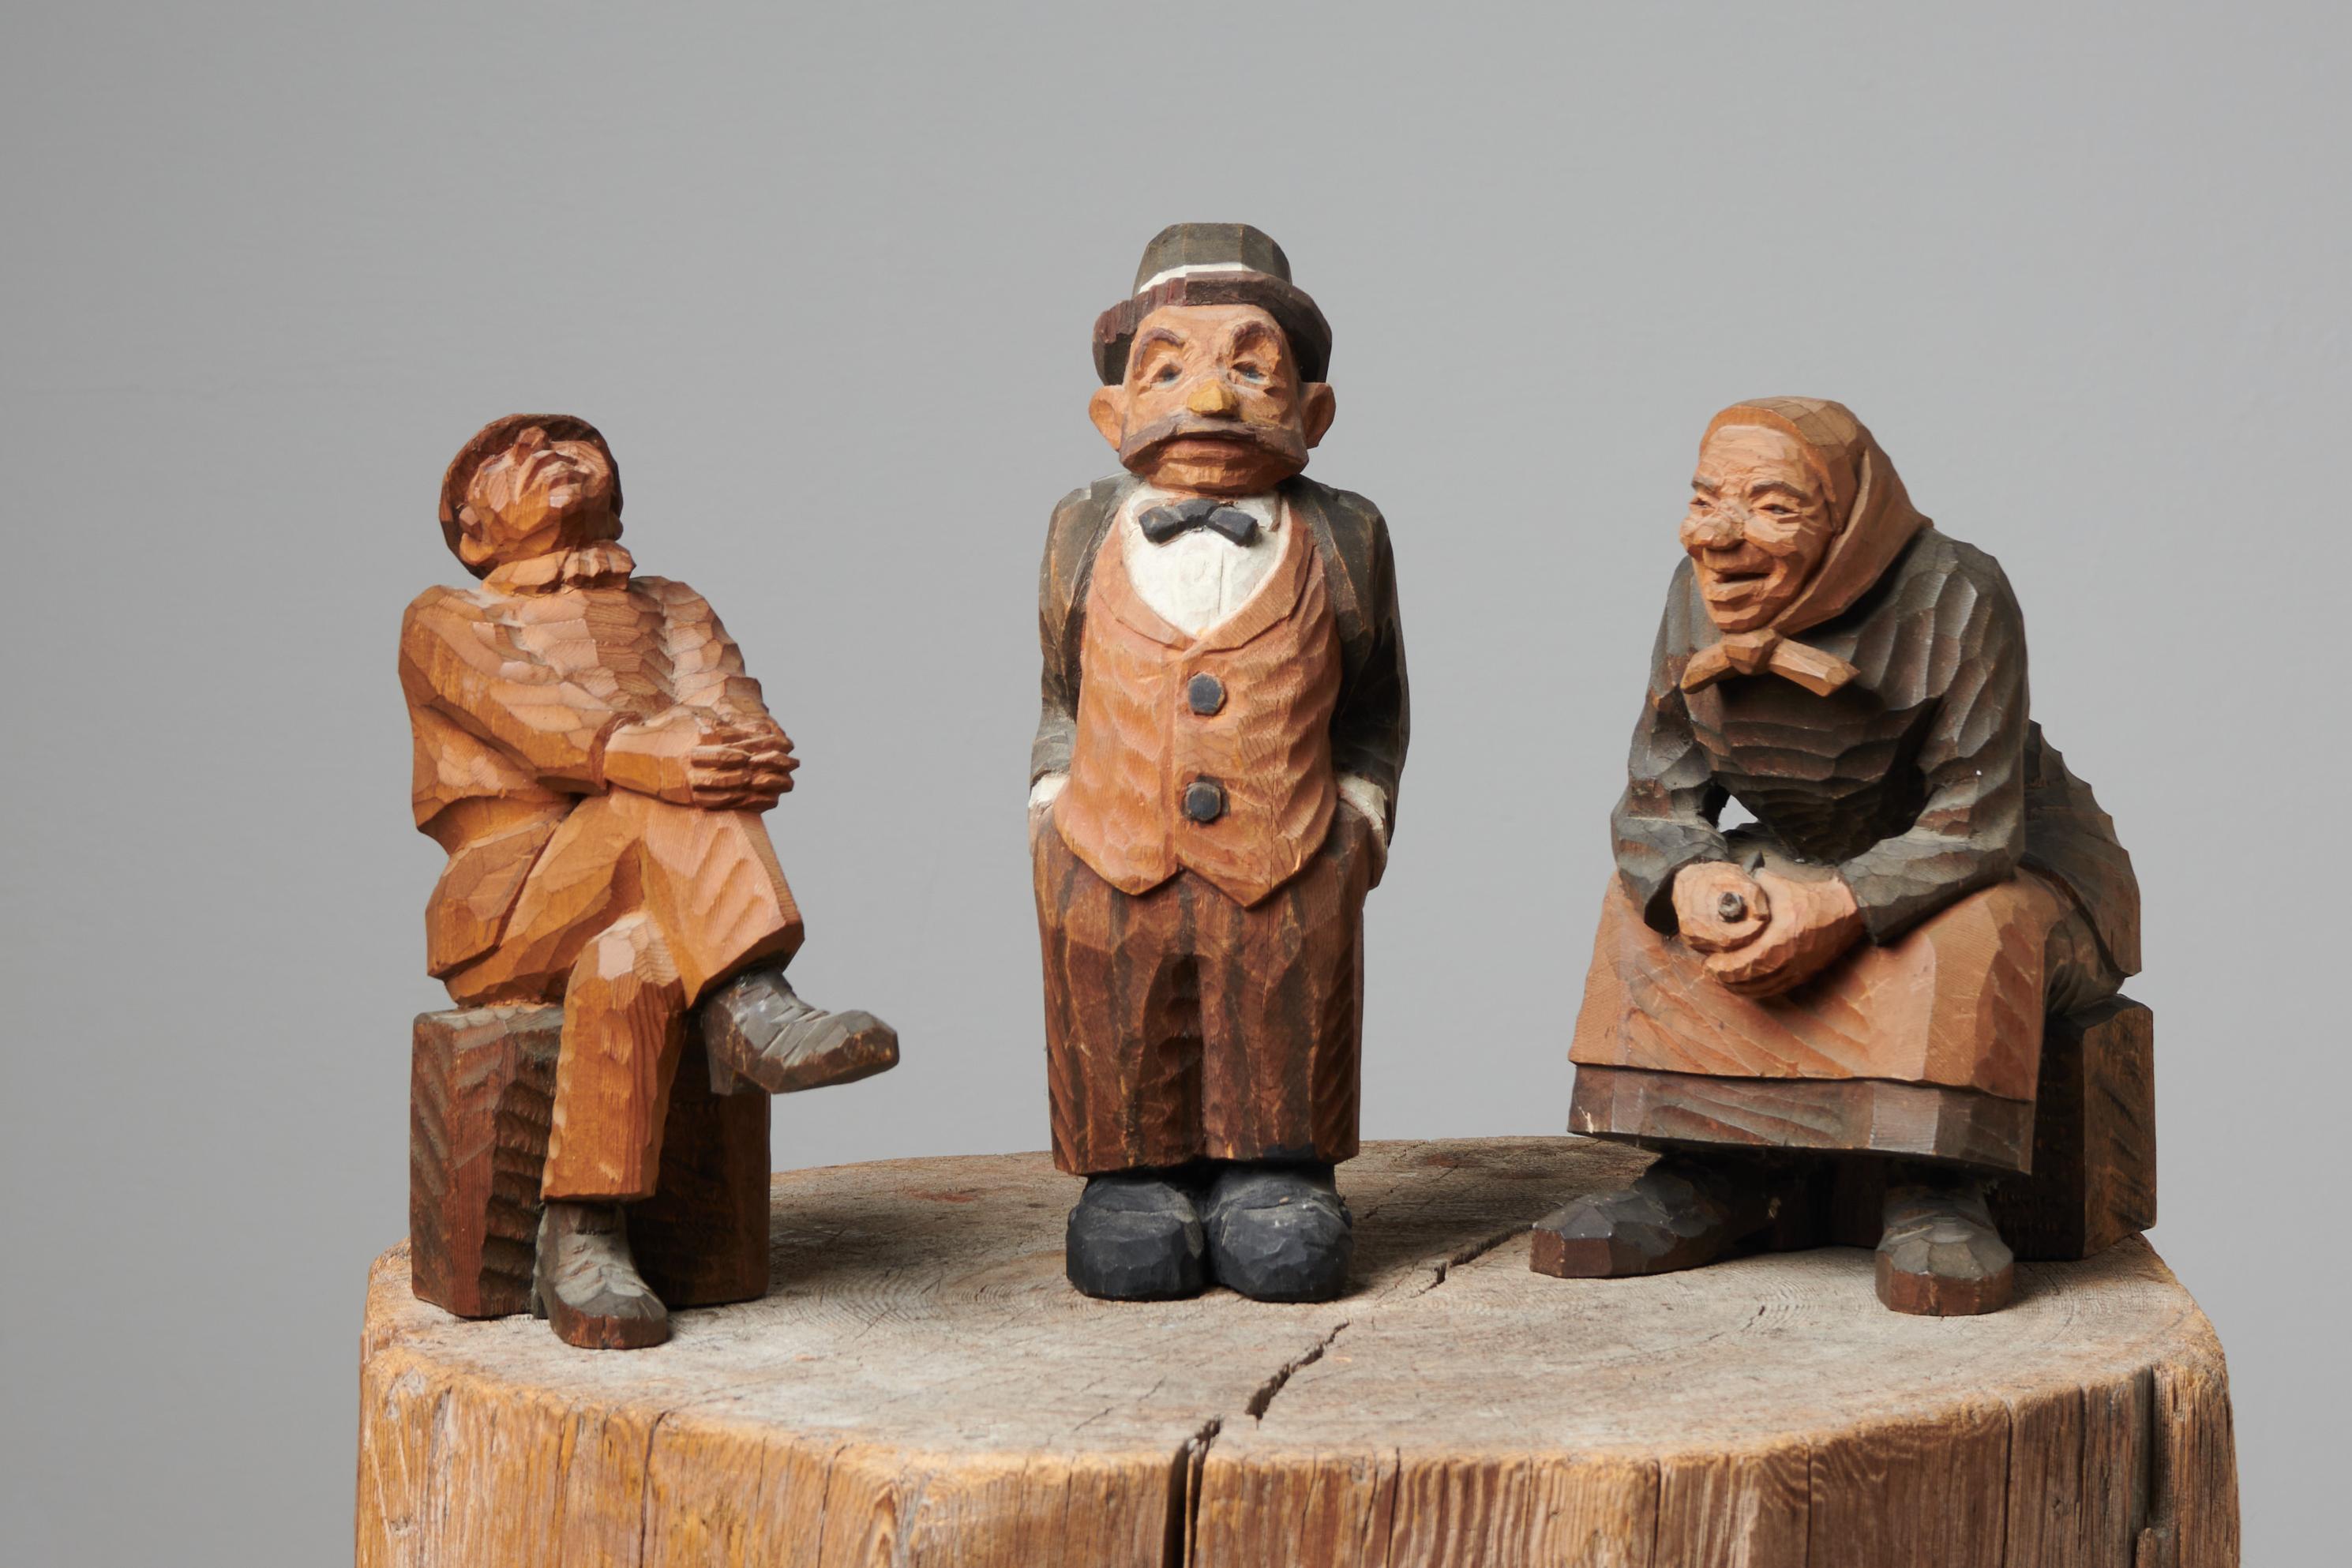 Charming Northern Swedish Handmade Folk Art Wooden Figurines In Good Condition For Sale In Kramfors, SE